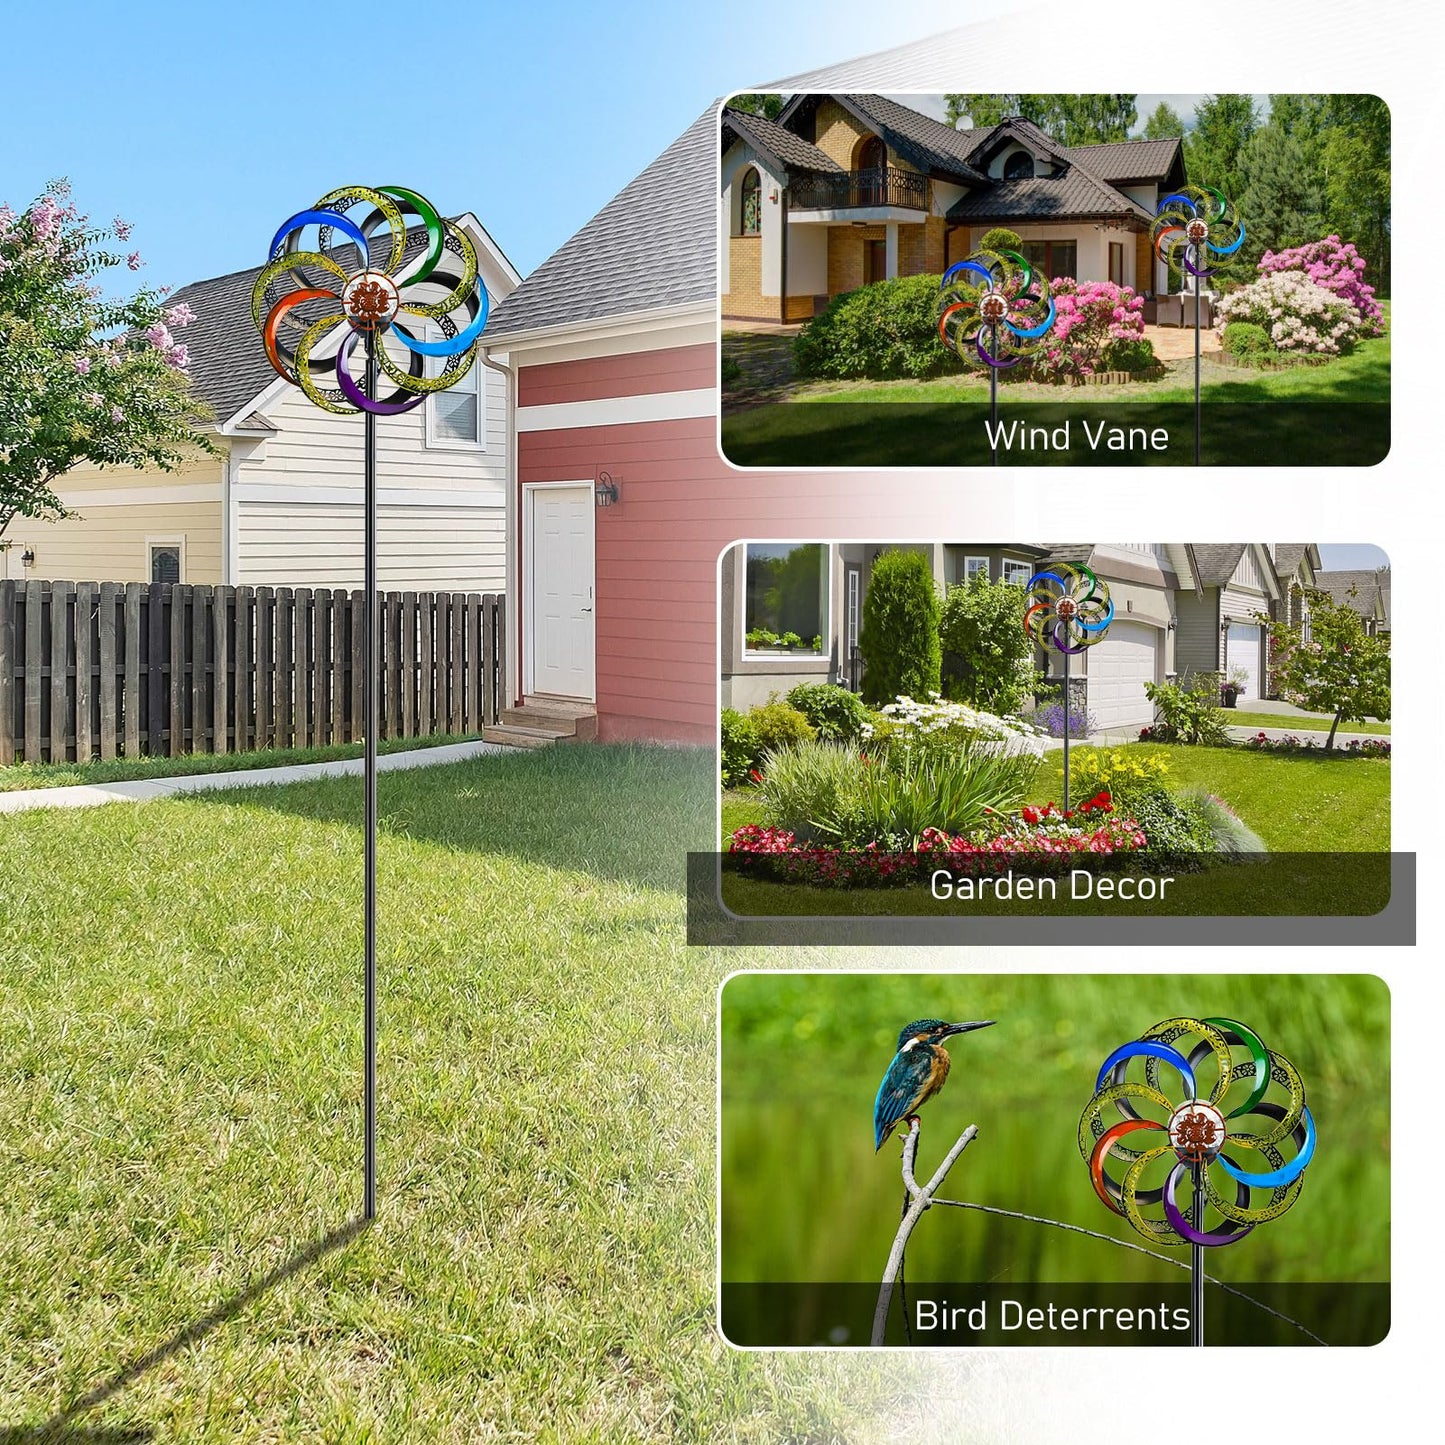 Wind Spinners Outdoor-Wind Spinners for Yard and Garden 75 in Yard Art Outdoor and Garden Clearance Large with Solar Powered Multi-Color Glass Ball Light for Lawn Backyard Decorations